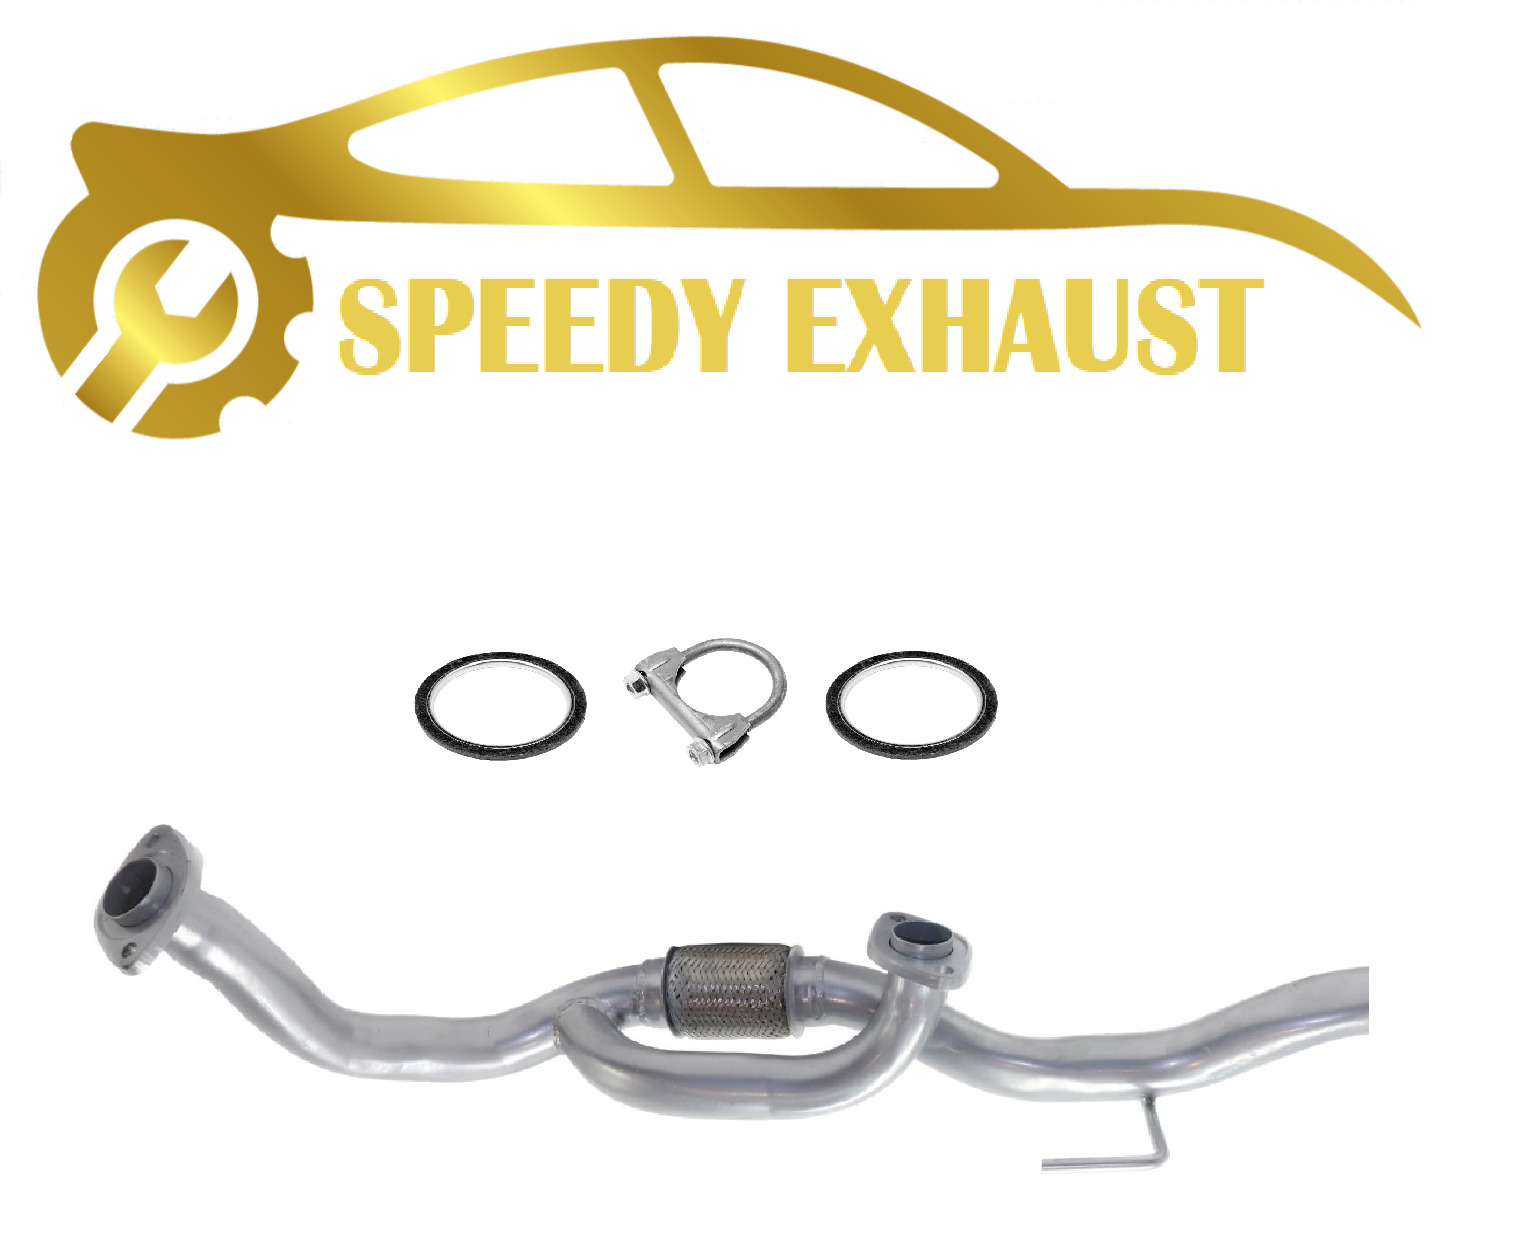 1997 1998 1999 2000 TOYOTA CAMRY 3.0L FRONT PIPE REPAIR KIT + GASKETS & HARDWARE